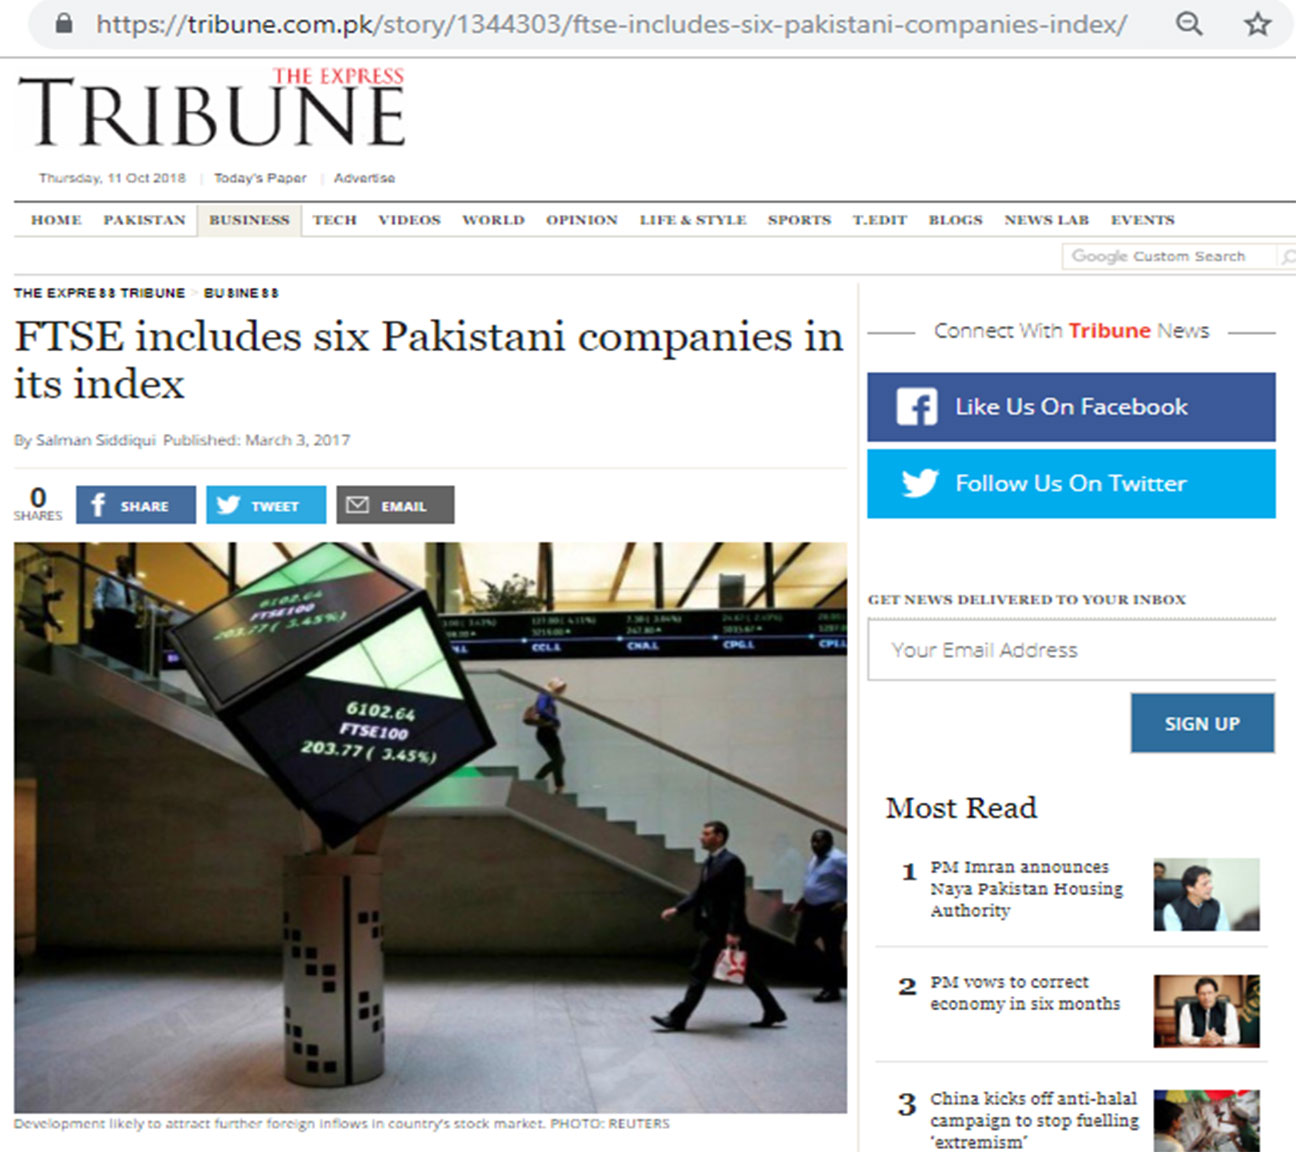 FTSE INCLUDES SIX PAKISTANI  COMPANIES IN ITS INDEX